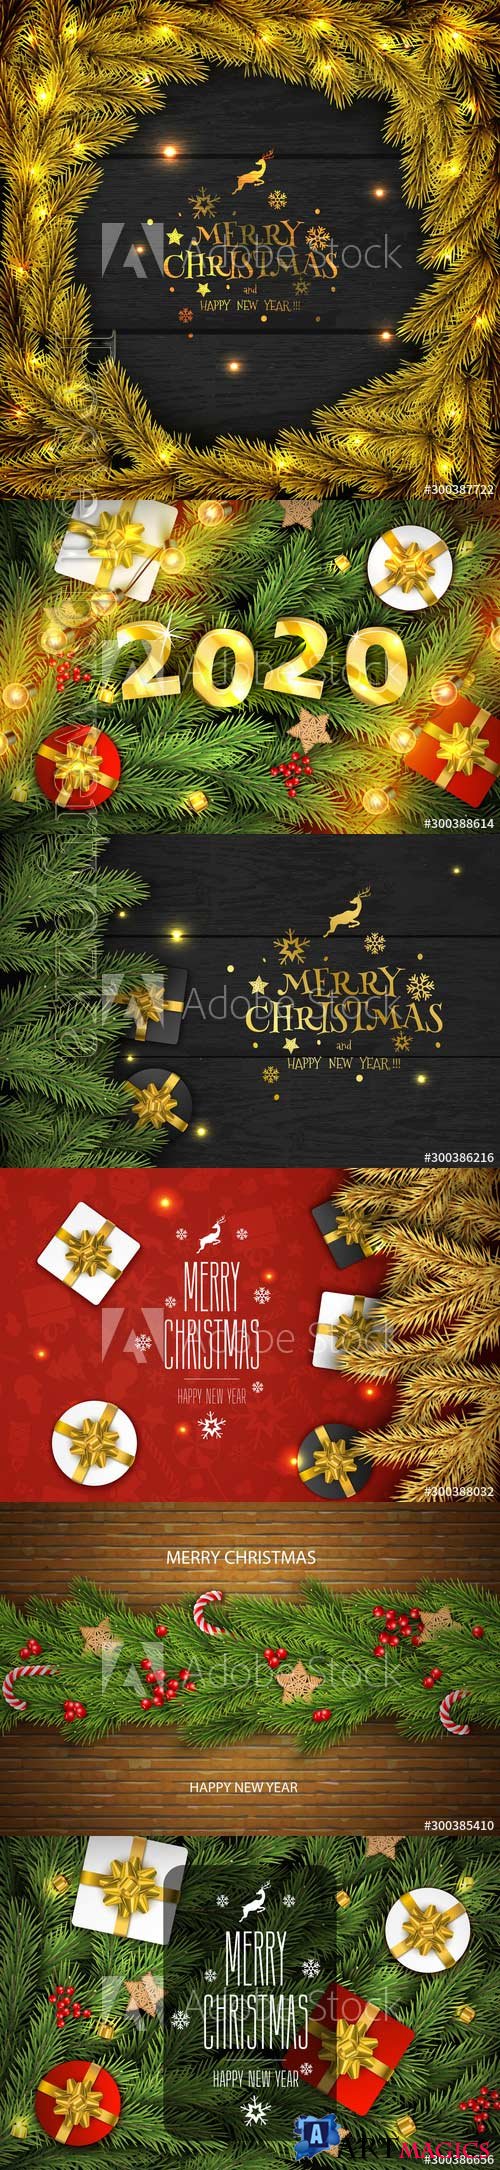 Merry Christmas and Happy New Year vector composition